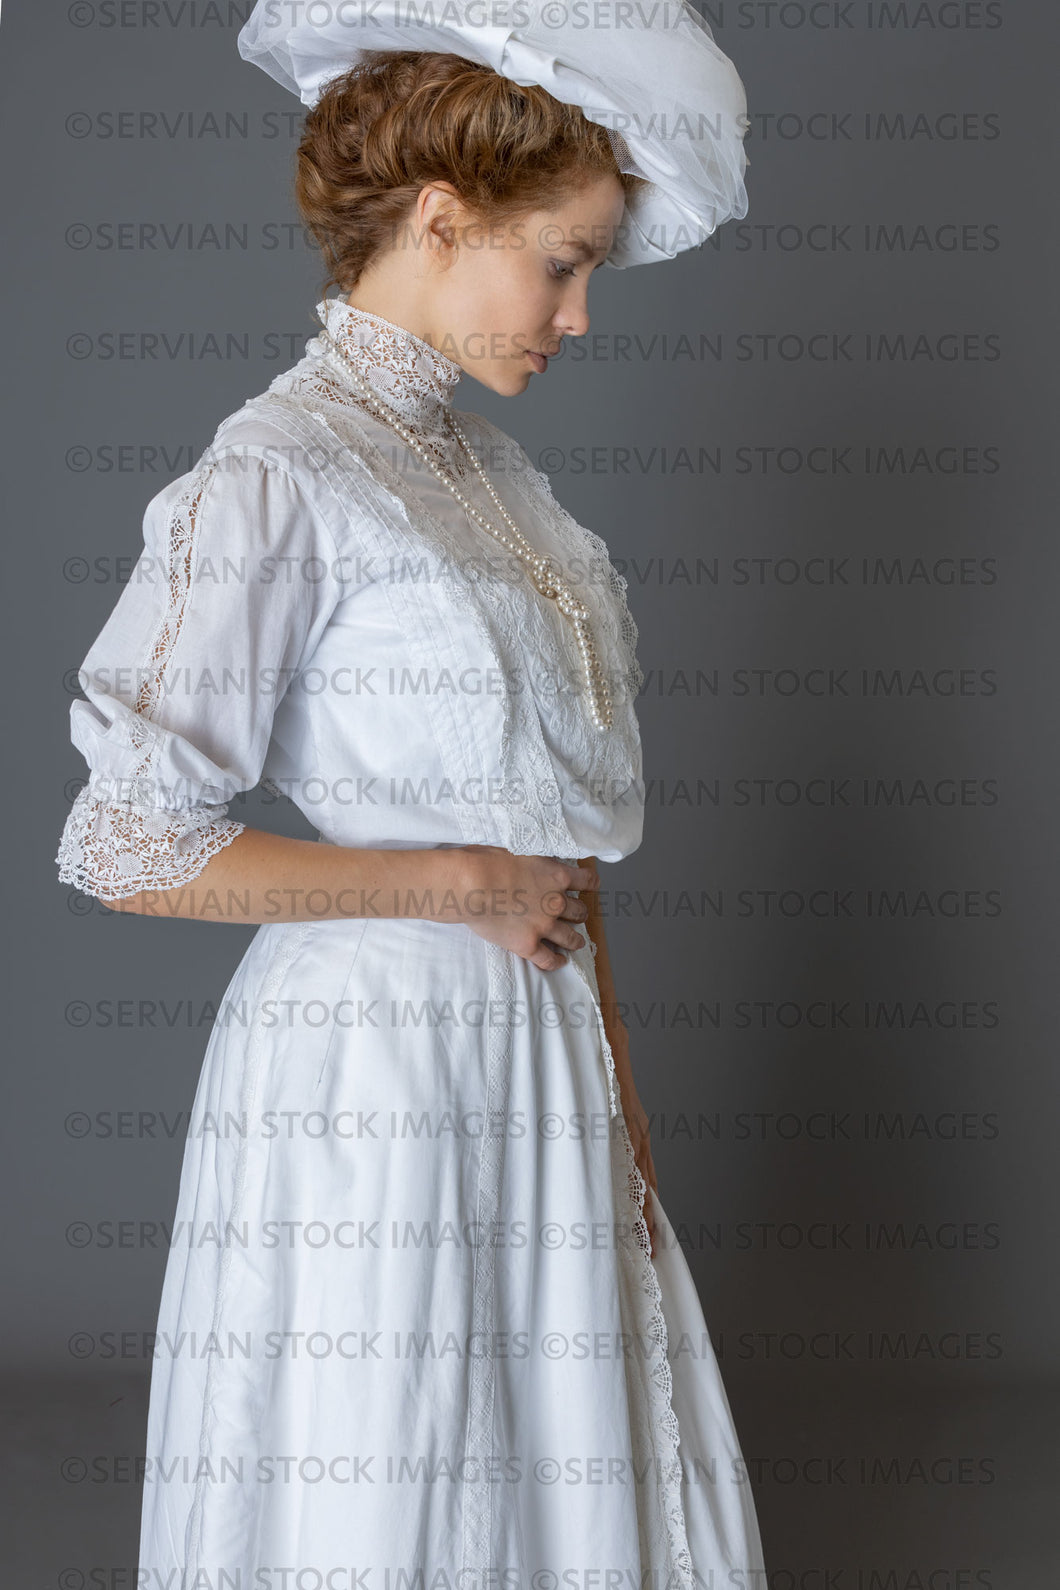 Edwardian woman in a white lace blouse and skirt with a pearl necklace and large hat (Anastasiya 4956)